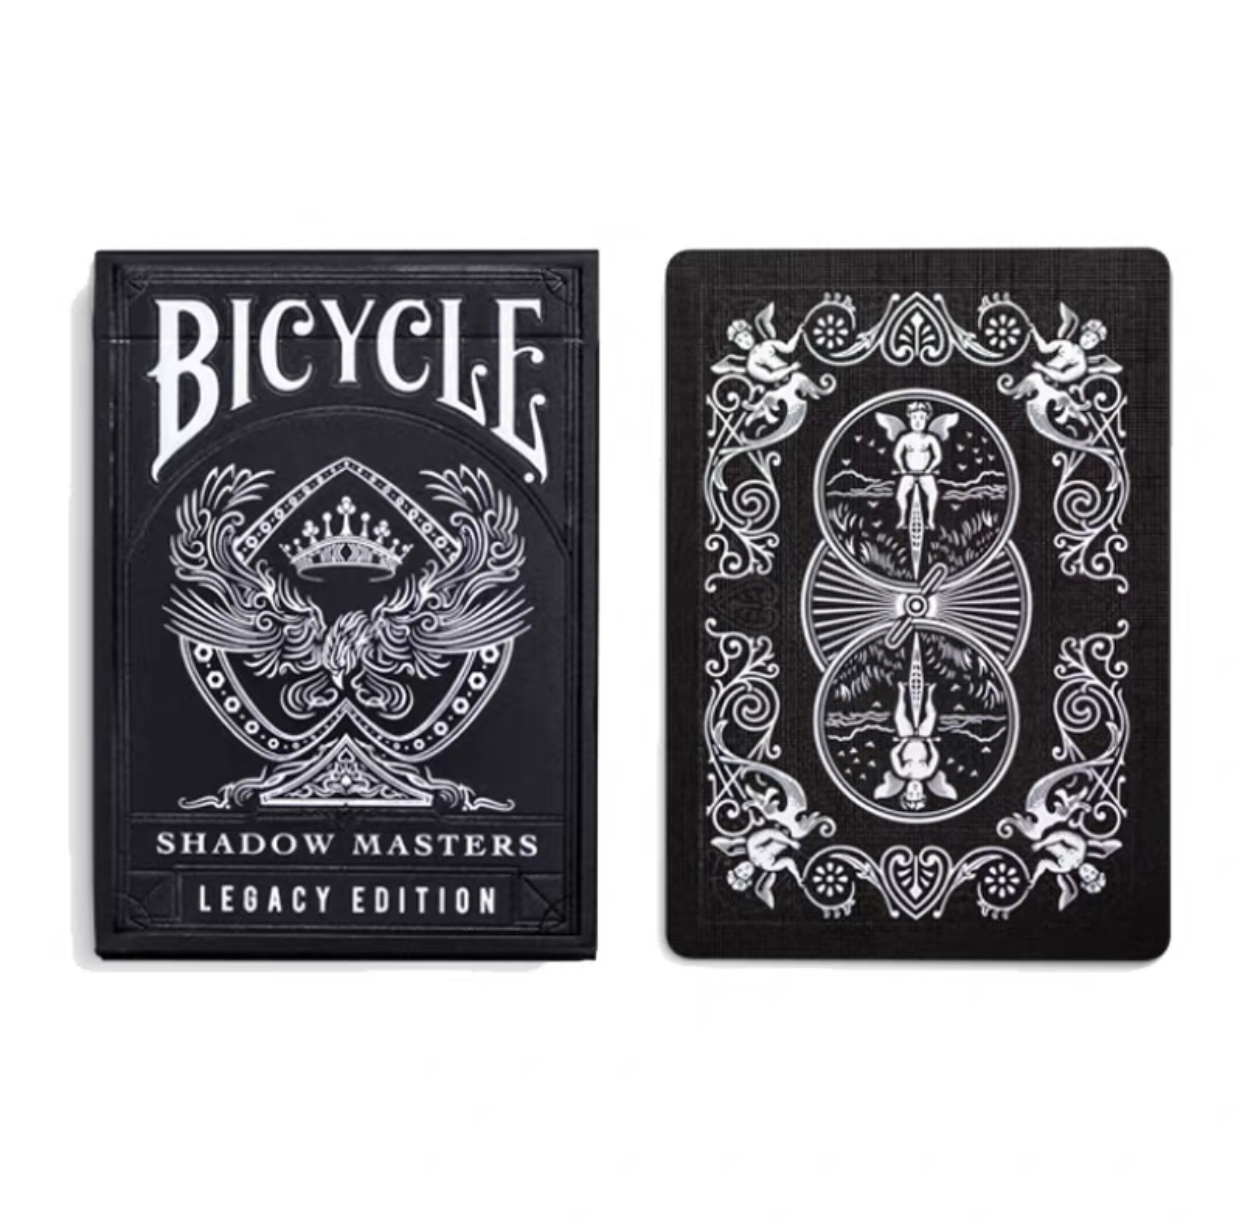 Bicycle Shadow Masters Legacy Edition PC16